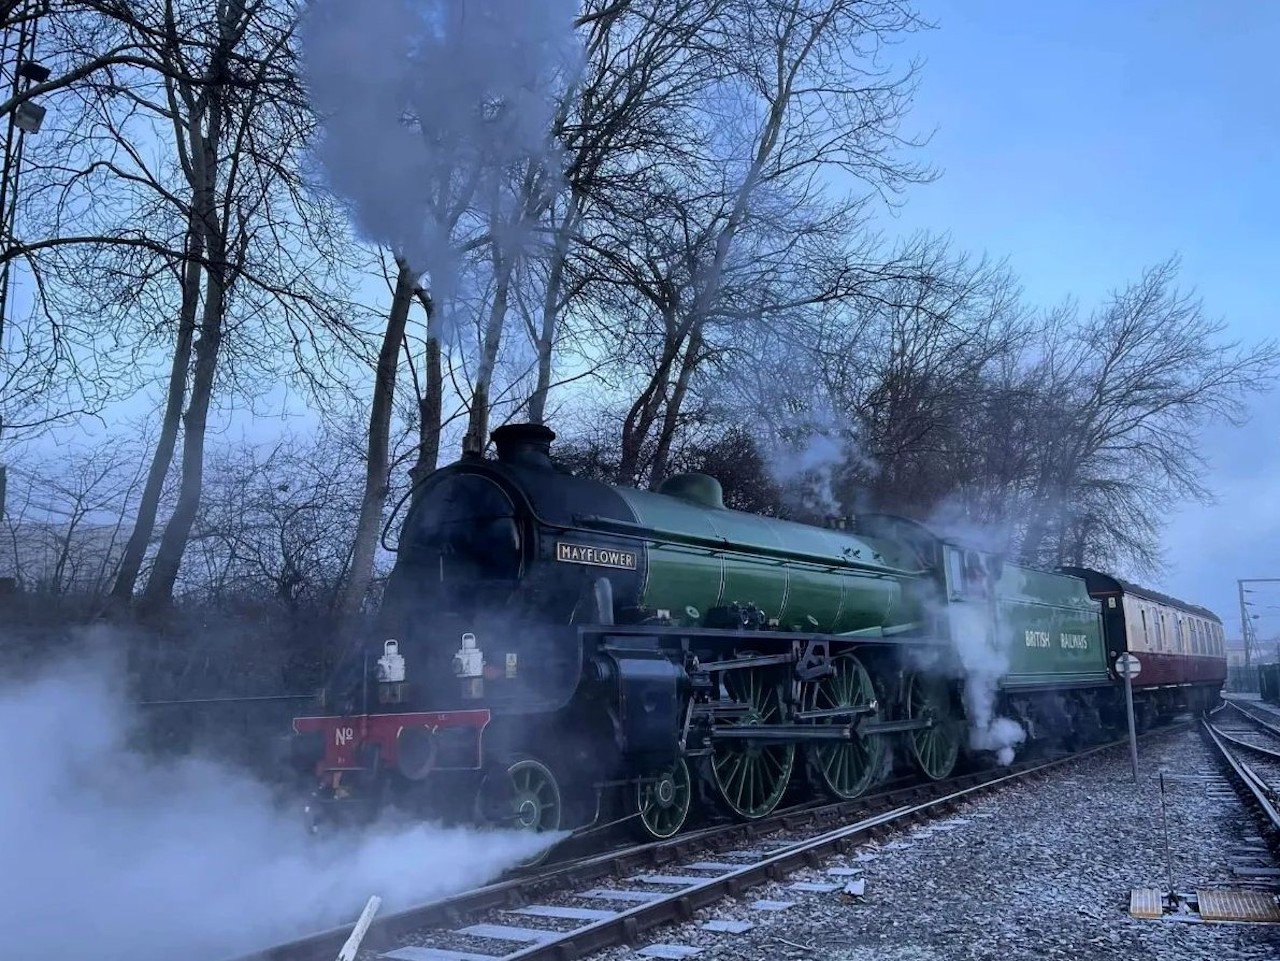 The Steam Dreams Rail Co's The Spirit of Christmas will depart 20 December for a magical evening of celebration aboard the only evening vintage steam train departing London this season.